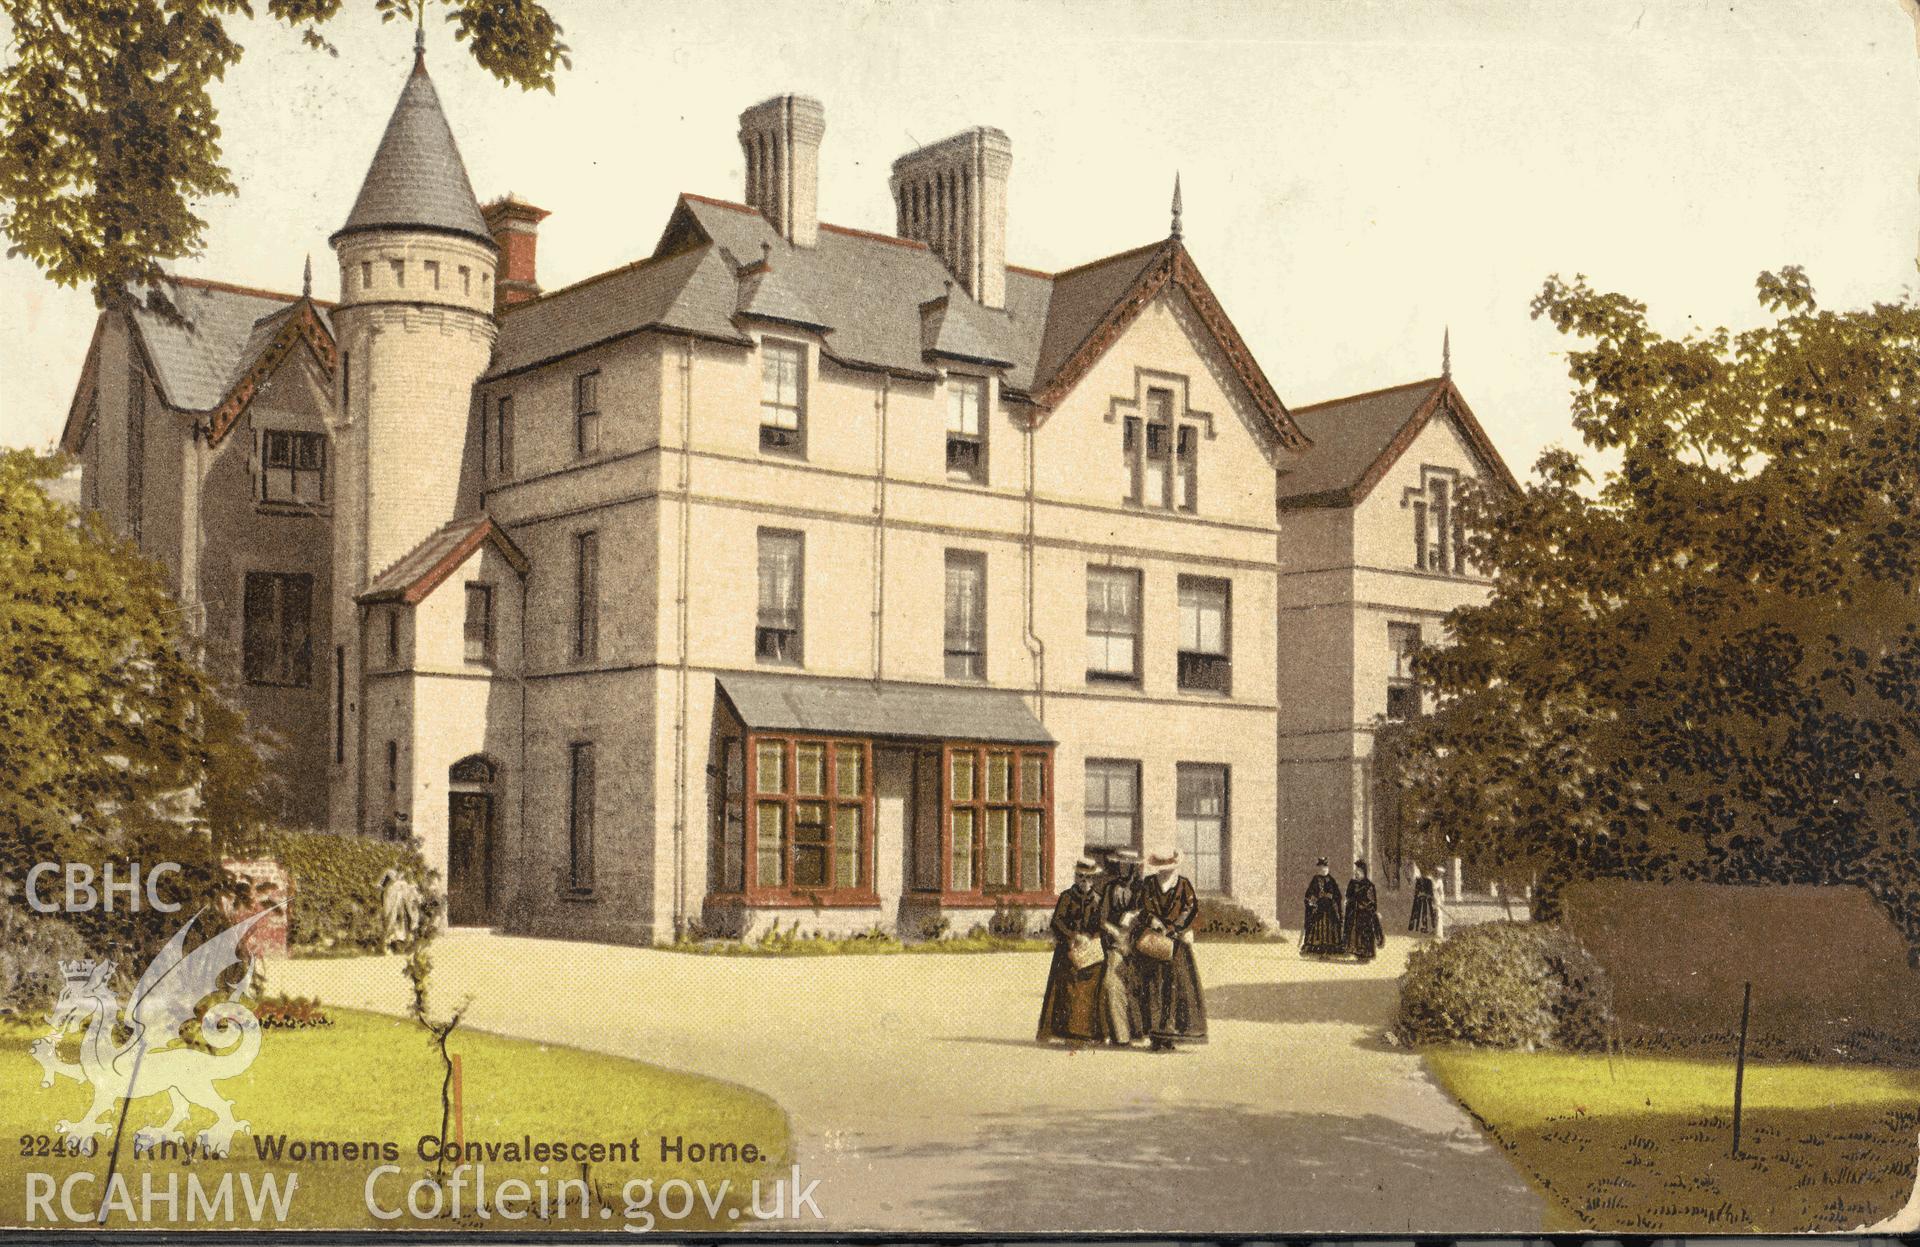 Digitised postcard image of Morfa Hall, Rhyl. Produced by Parks and Gardens Data Services, from an original item in the Peter Davis Collection at Parks and Gardens UK. We hold only web-resolution images of this collection, suitable for viewing on screen and for research purposes only. We do not hold the original images, or publication quality scans.